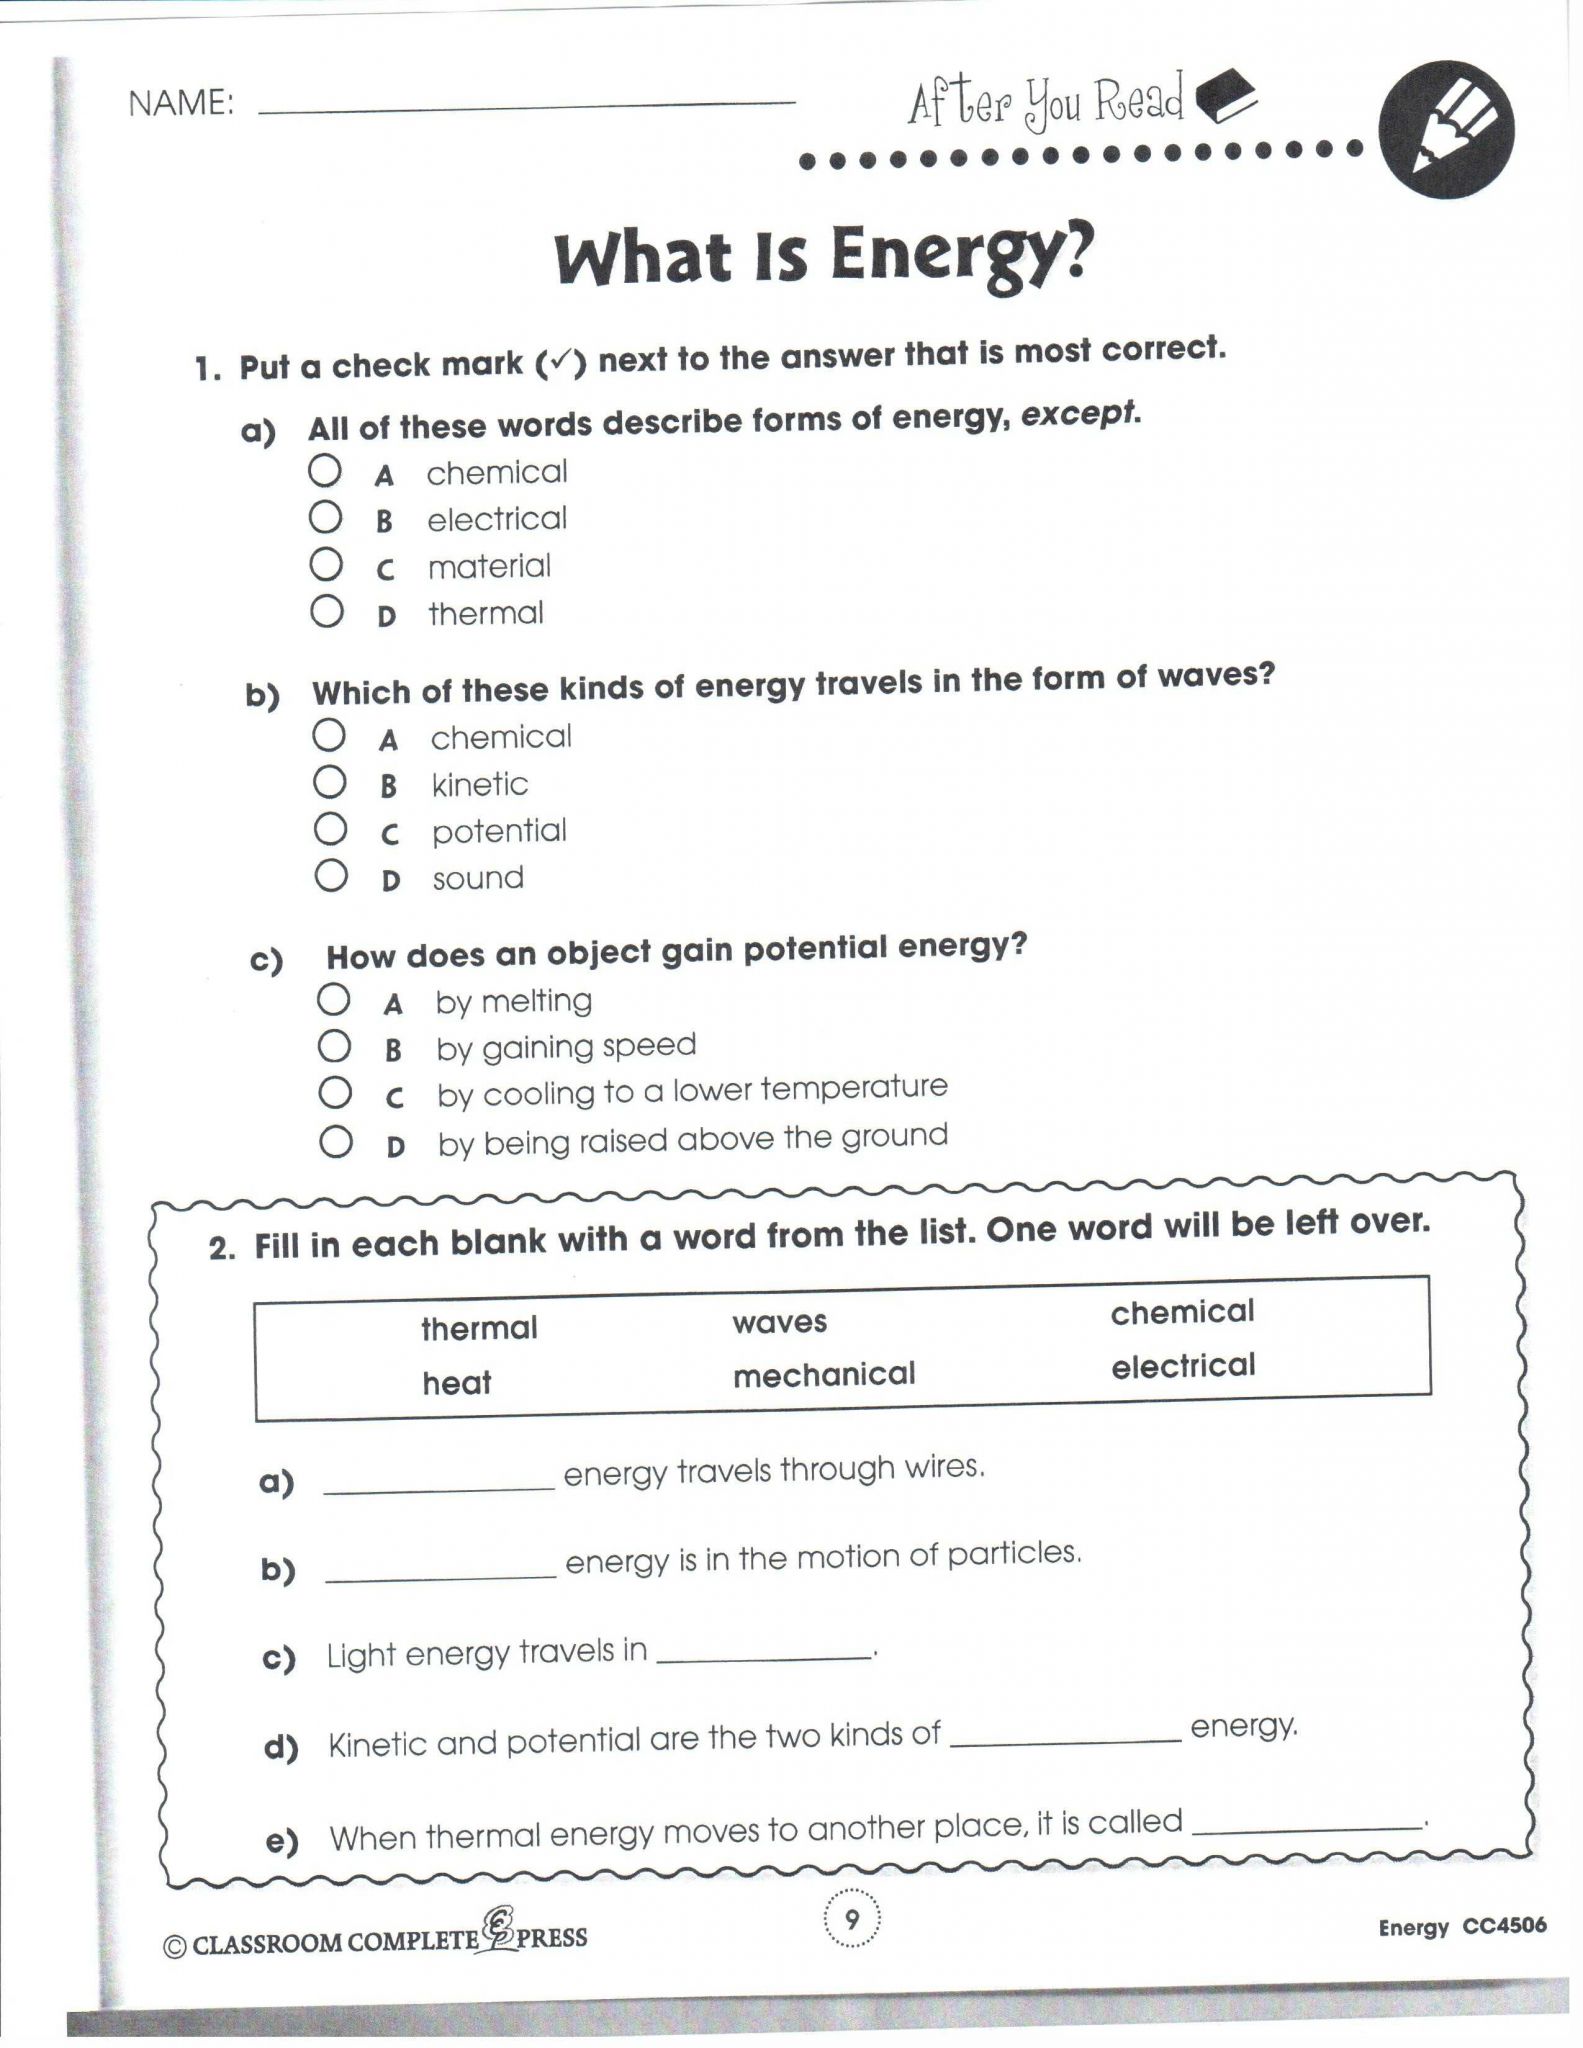 The Absorption Of Light by Photosynthetic Pigments Worksheet Answers Also Speed and Velocity Worksheet Answers Choice Image Worksheet Math